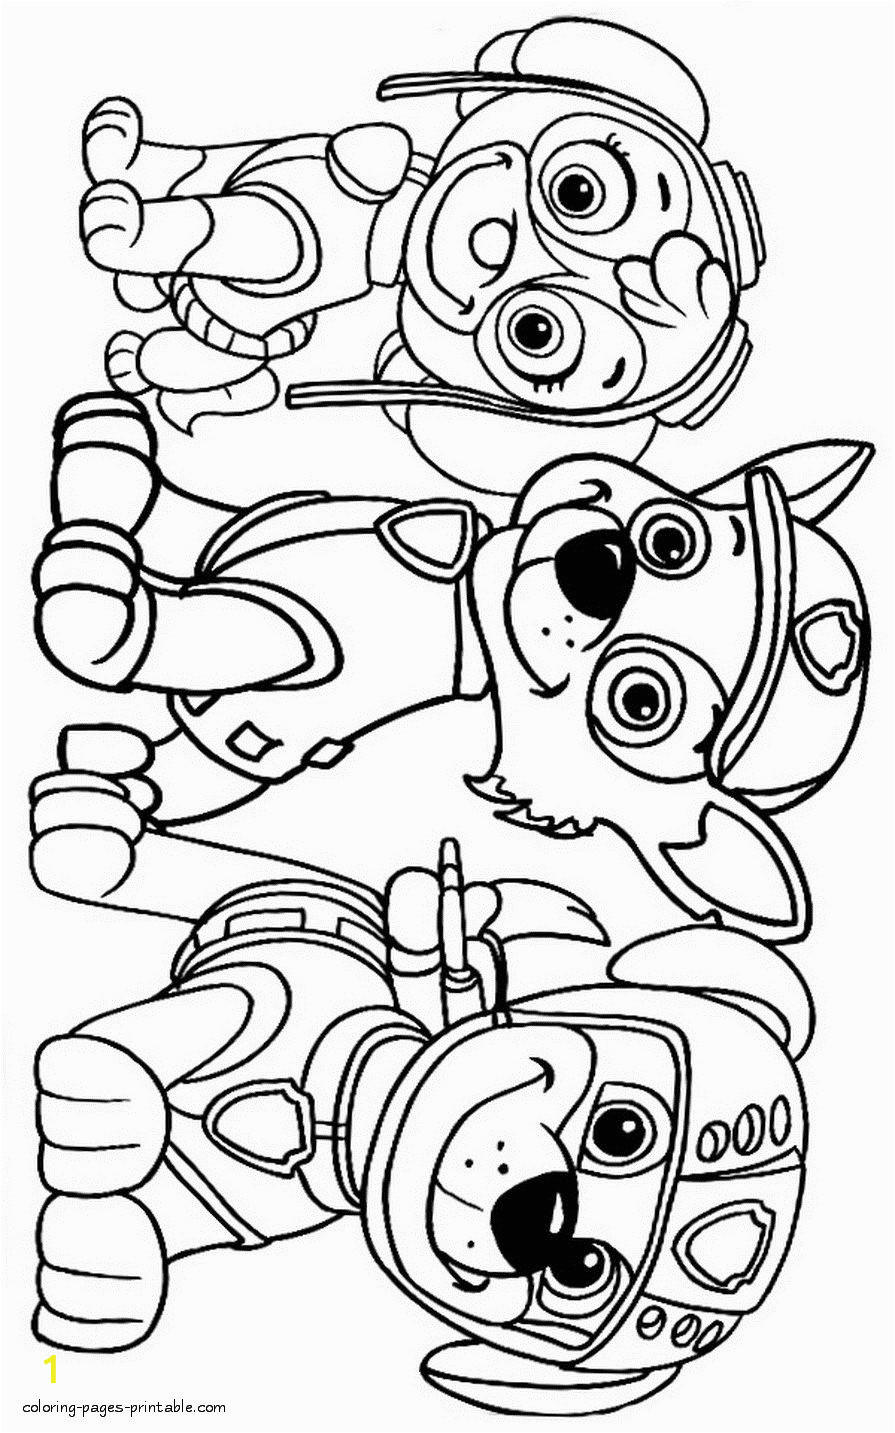 Free Printable Paw Patrol Coloring Pages Cool Winsome Free Printable Paw Patrol Coloring Pages Best